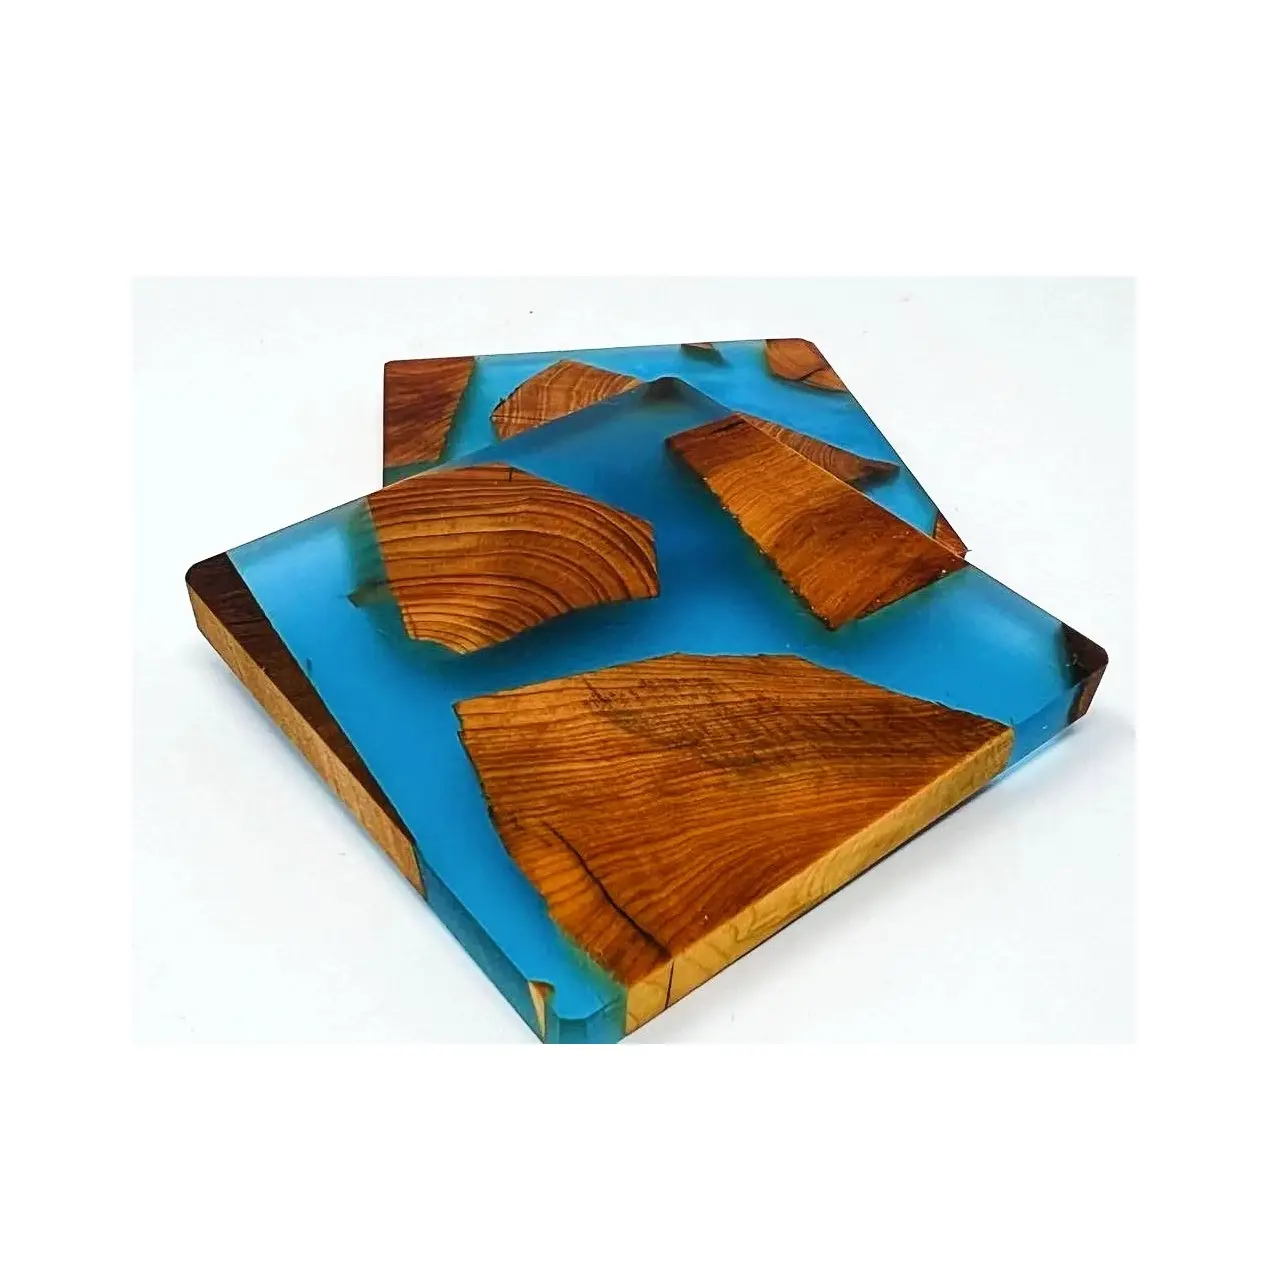 Tea Cup Coaster Mango Wooden & Blue Resin Coaster Square Shape At Low Cost Table Decoration & Accessories For Restaurant Home